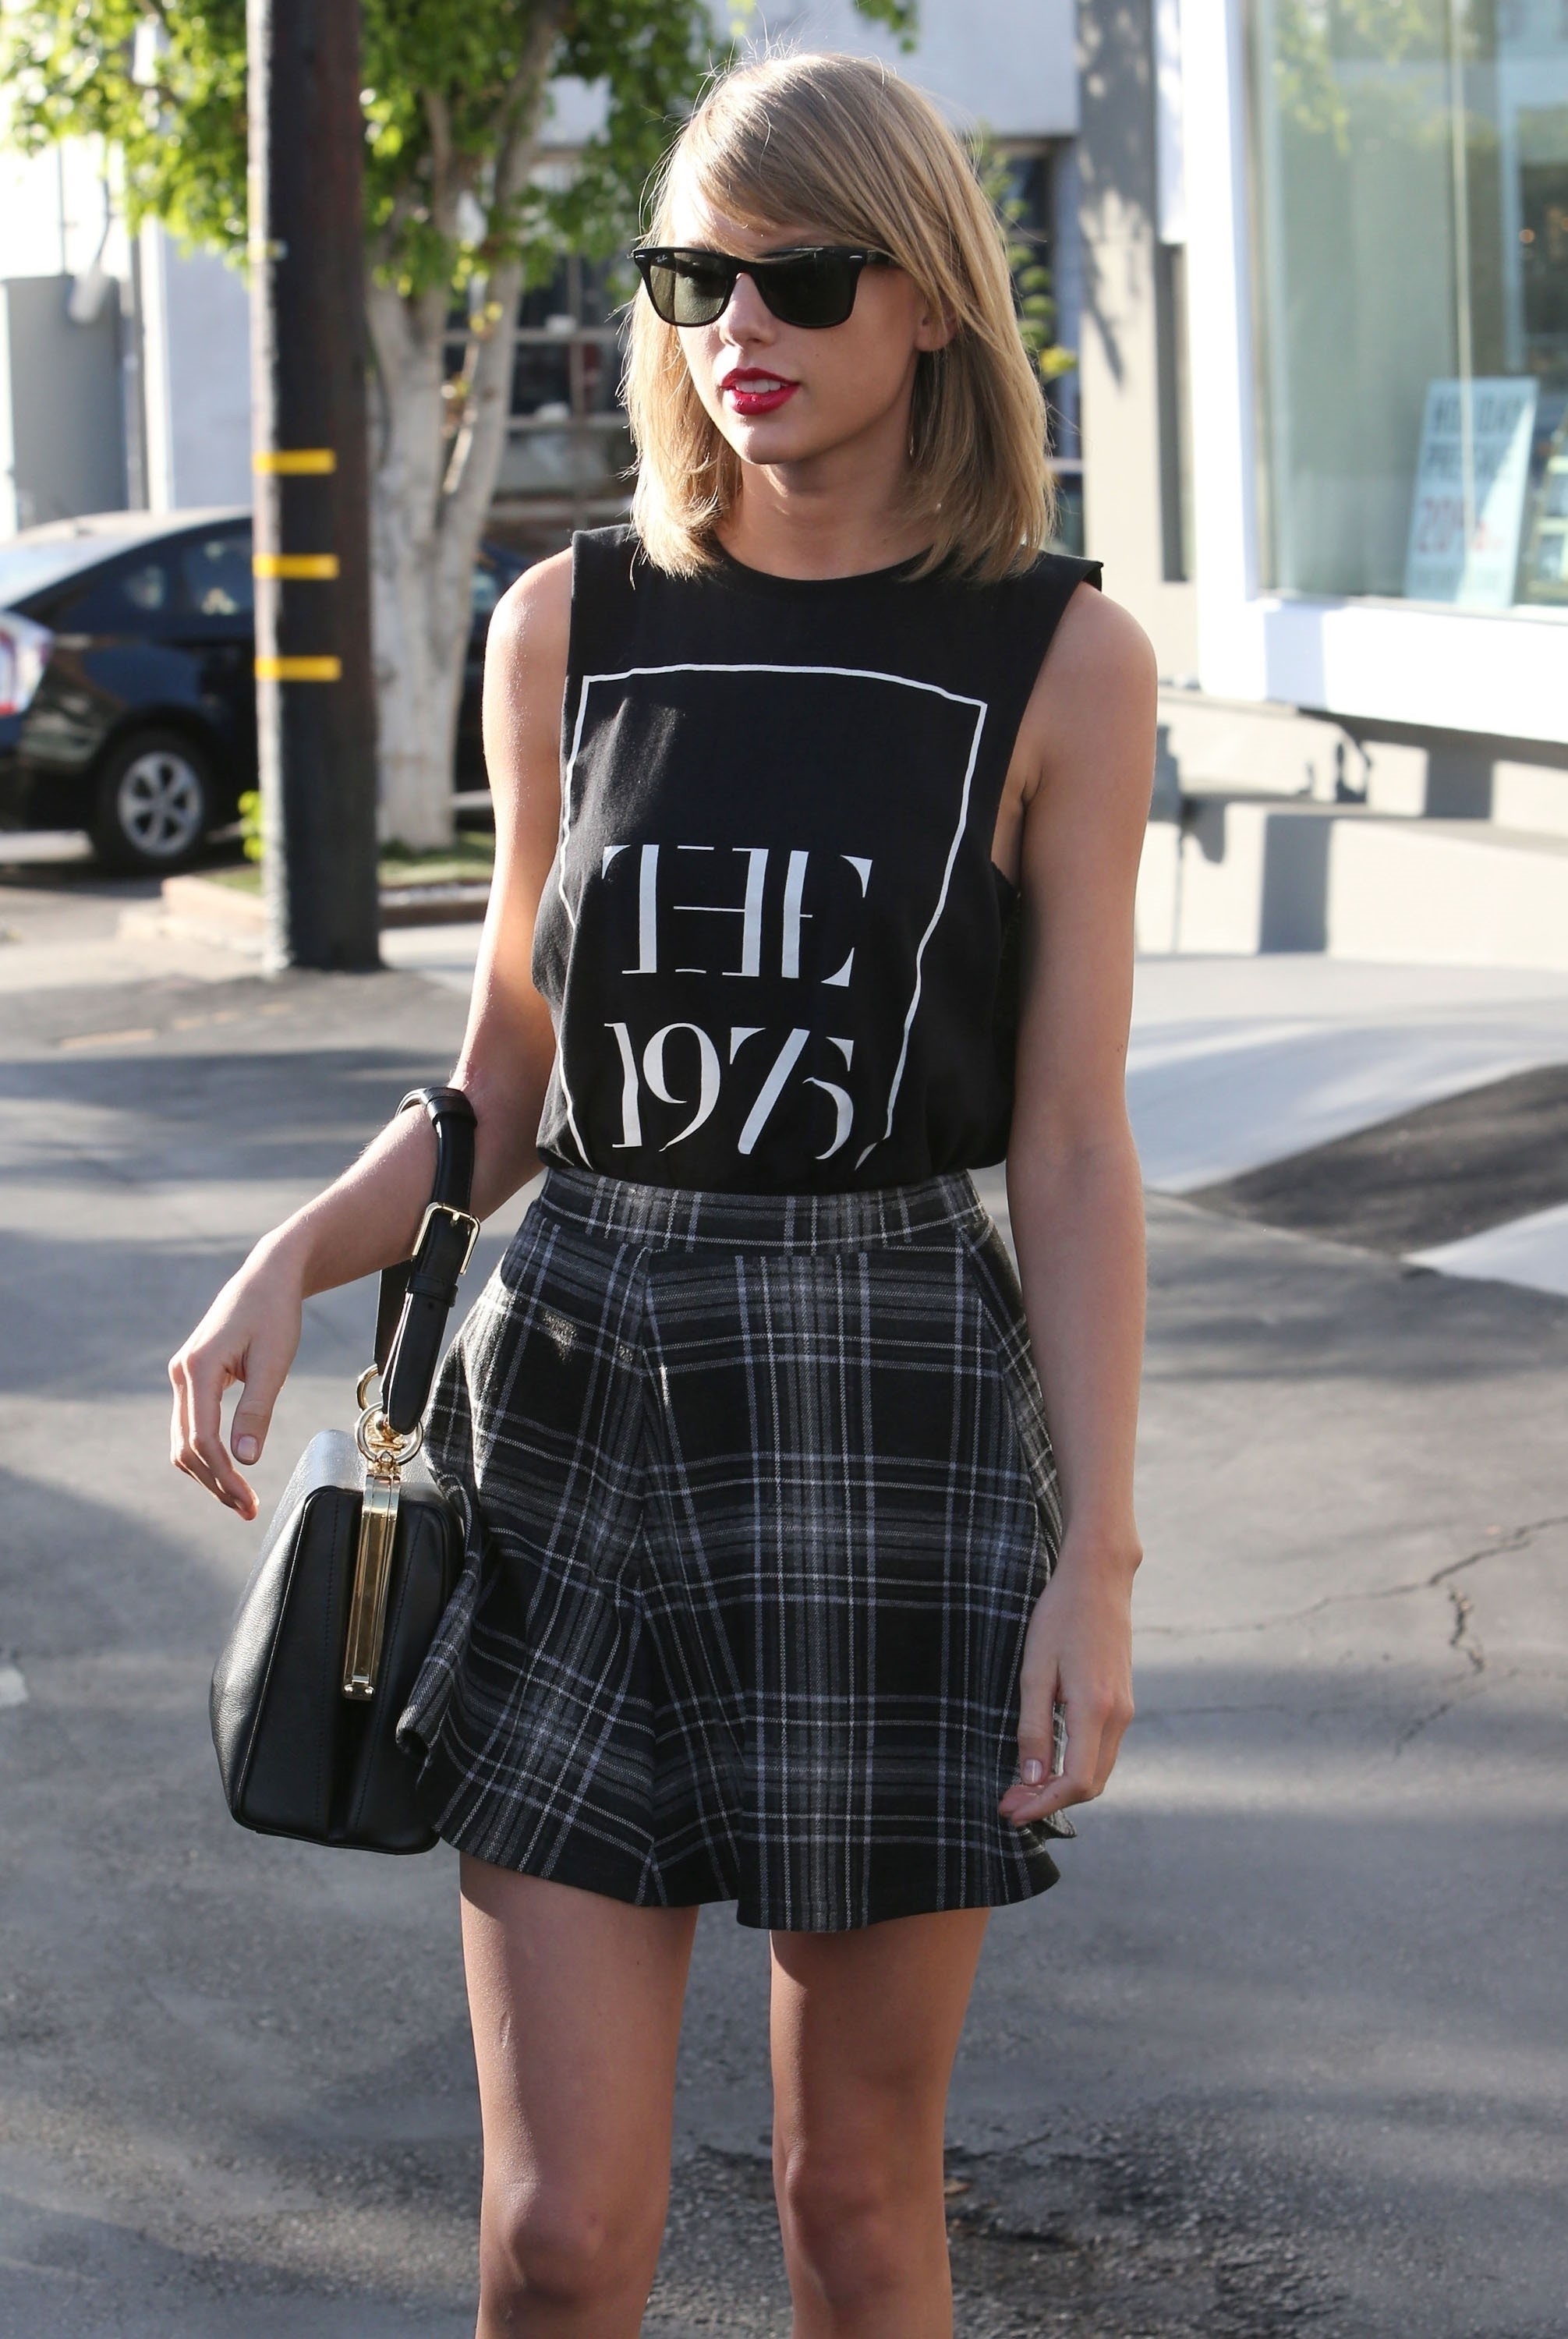 Taylor Swift in a sleeveless &quot;The 1975&quot;  top and plaid skirt, wearing sunglasses and carrying a handbag